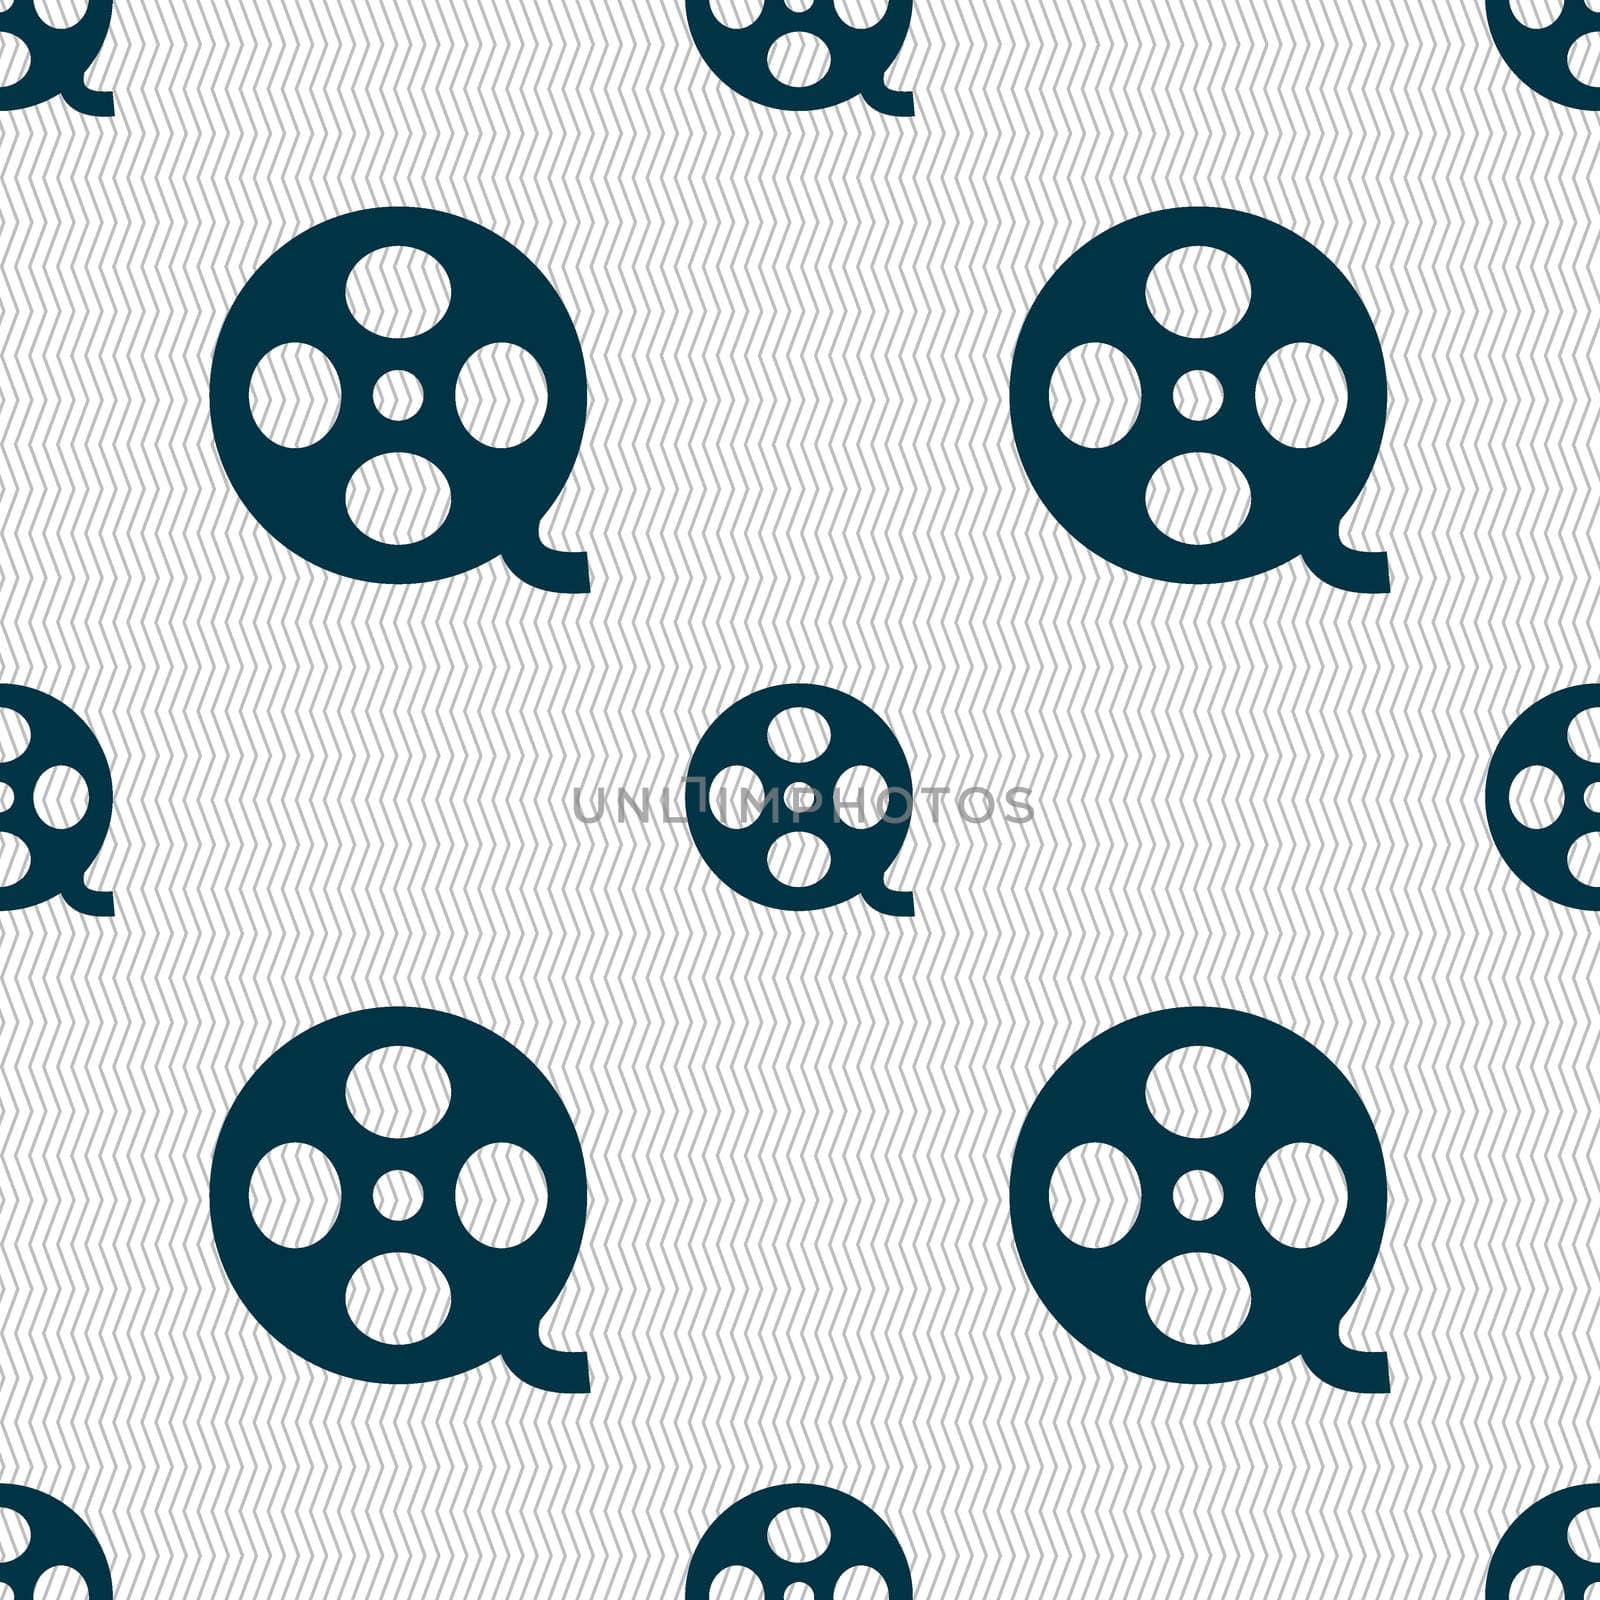 Video sign icon. frame symbol. Seamless abstract background with geometric shapes. illustration